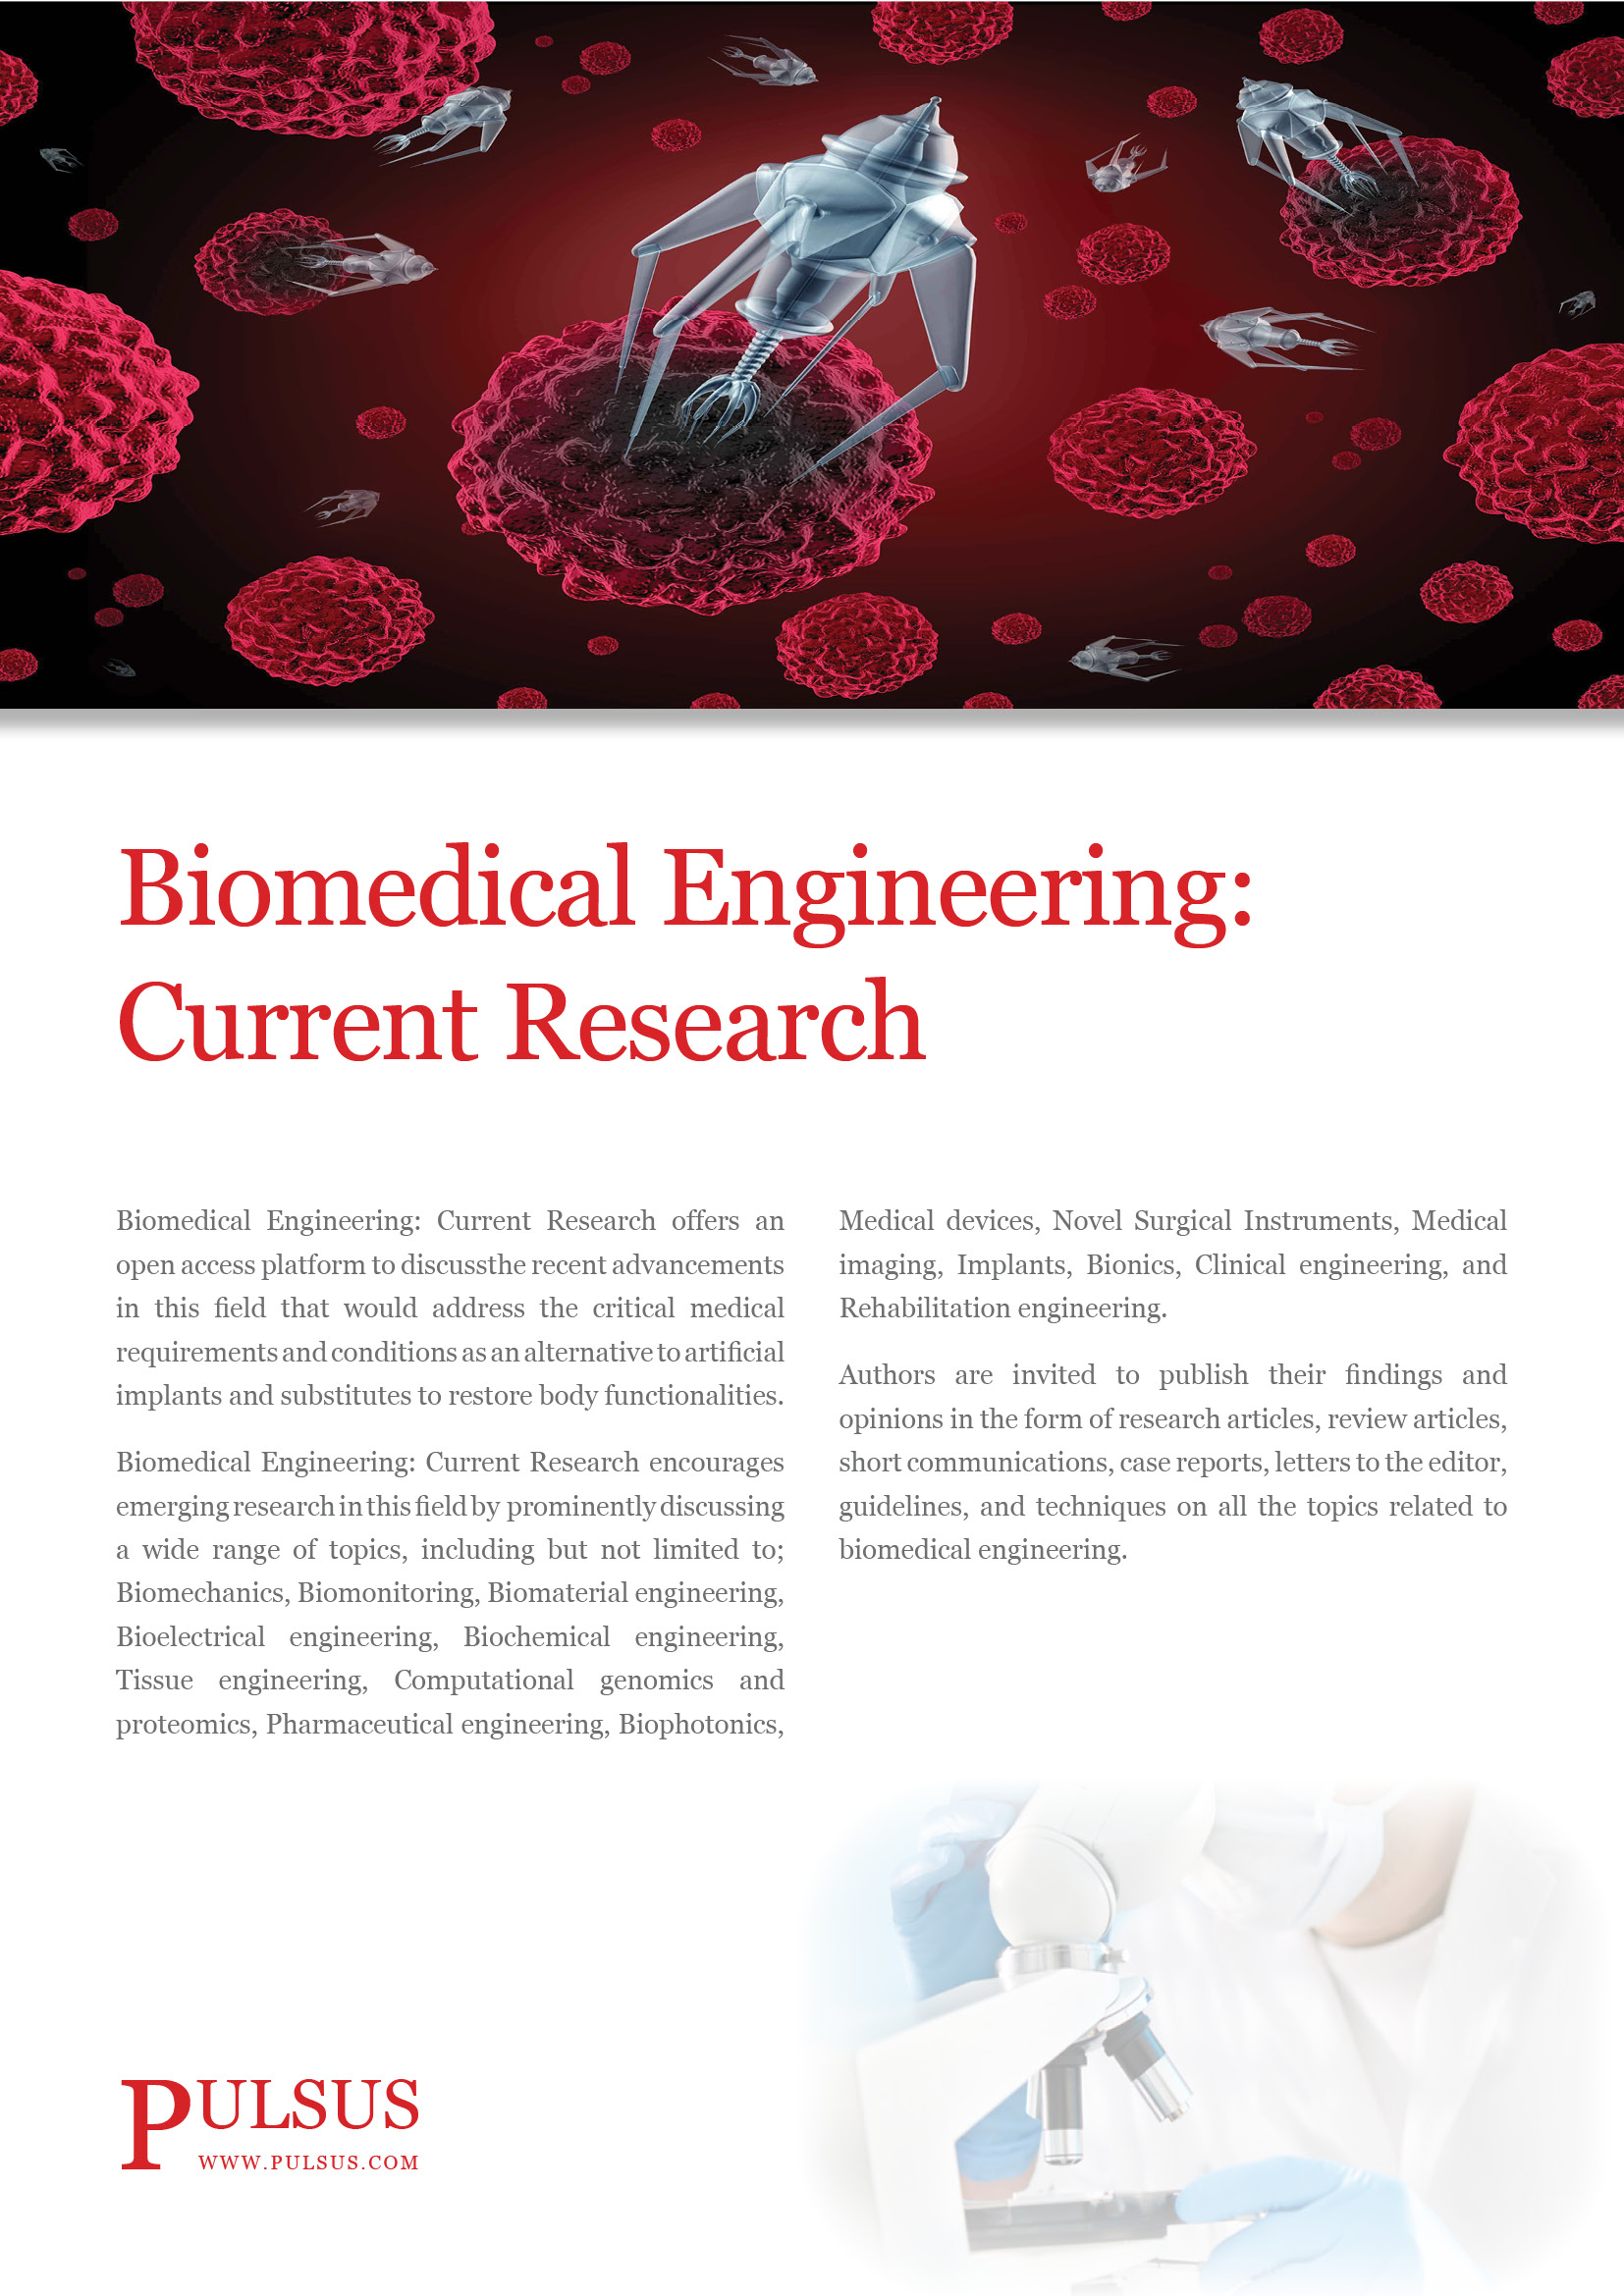 Biomedical Engineering: Current Research